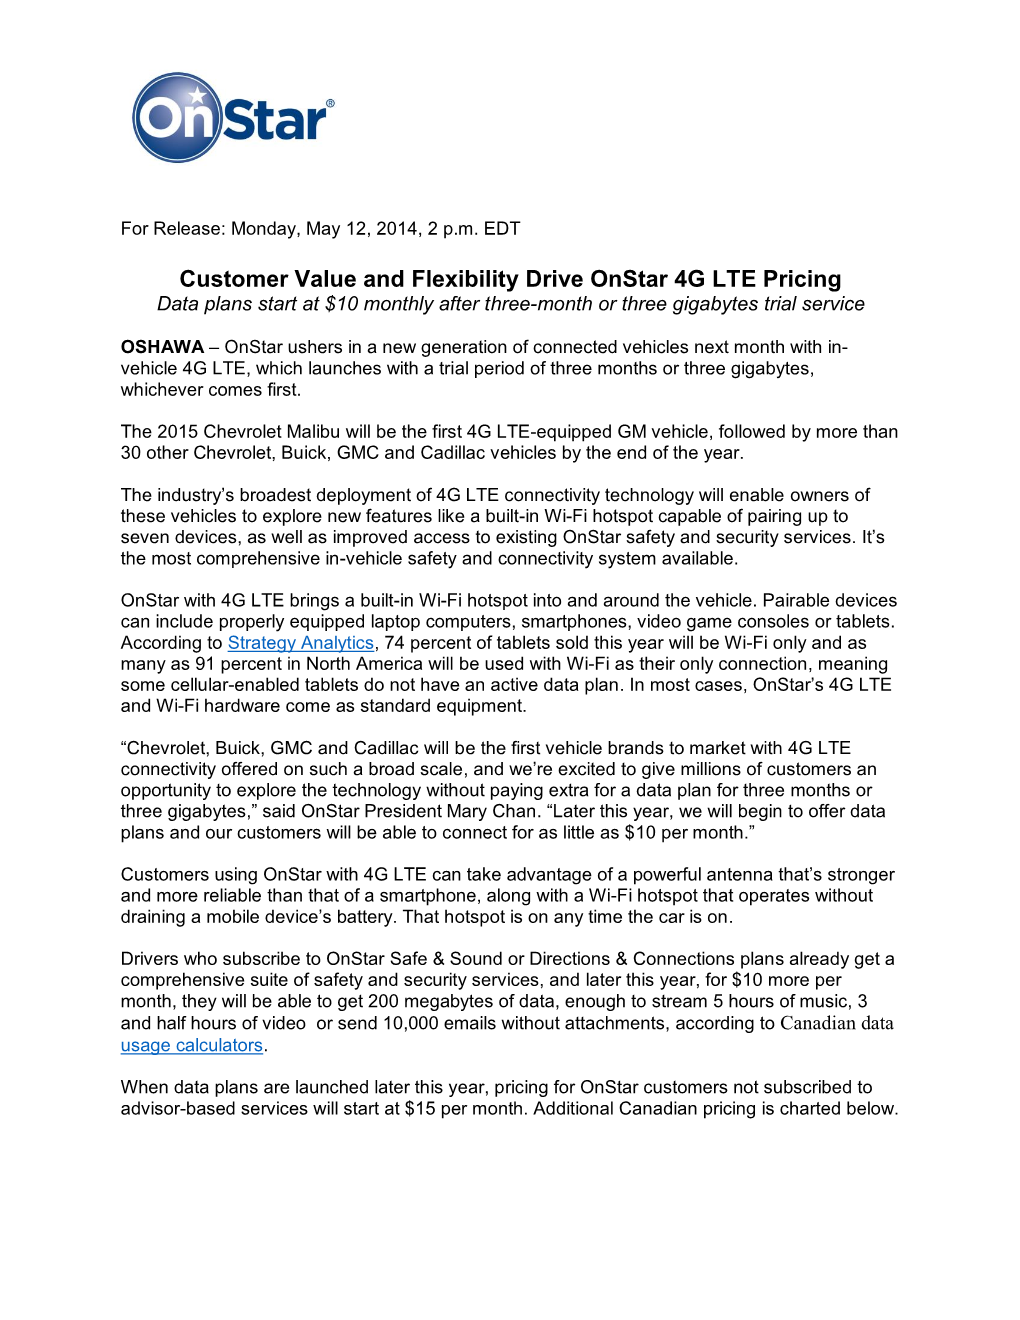 Customer Value and Flexibility Drive Onstar 4G LTE Pricing Data Plans Start at $10 Monthly After Three-Month Or Three Gigabytes Trial Service